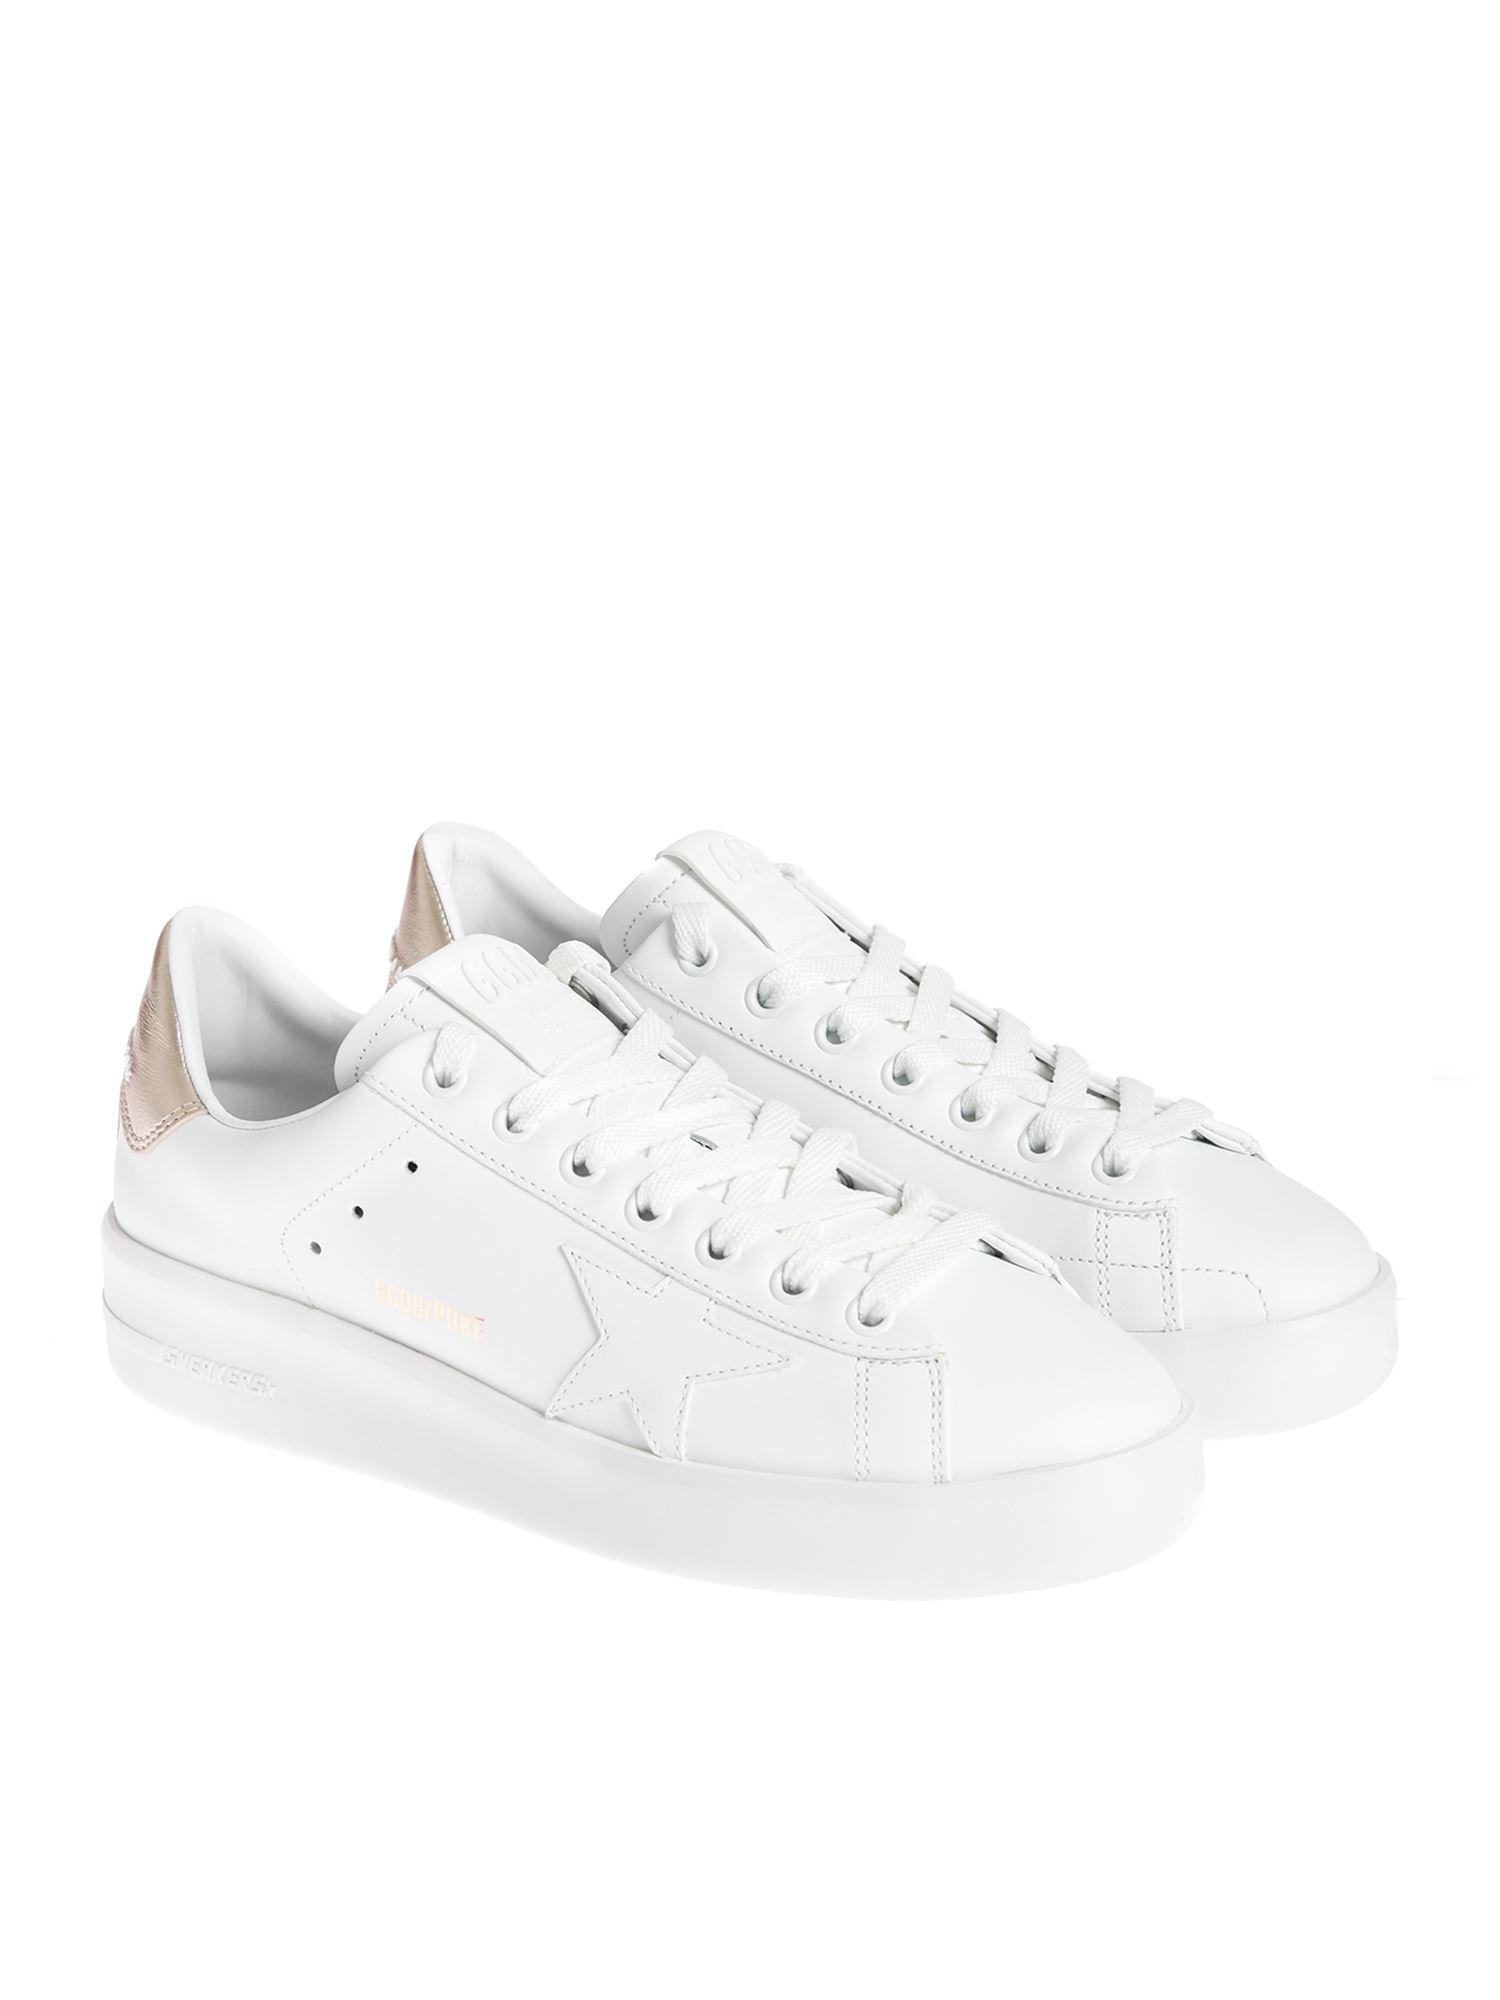 Golden Goose Deluxe Brand Leather Purestar Sneakers in White - Lyst